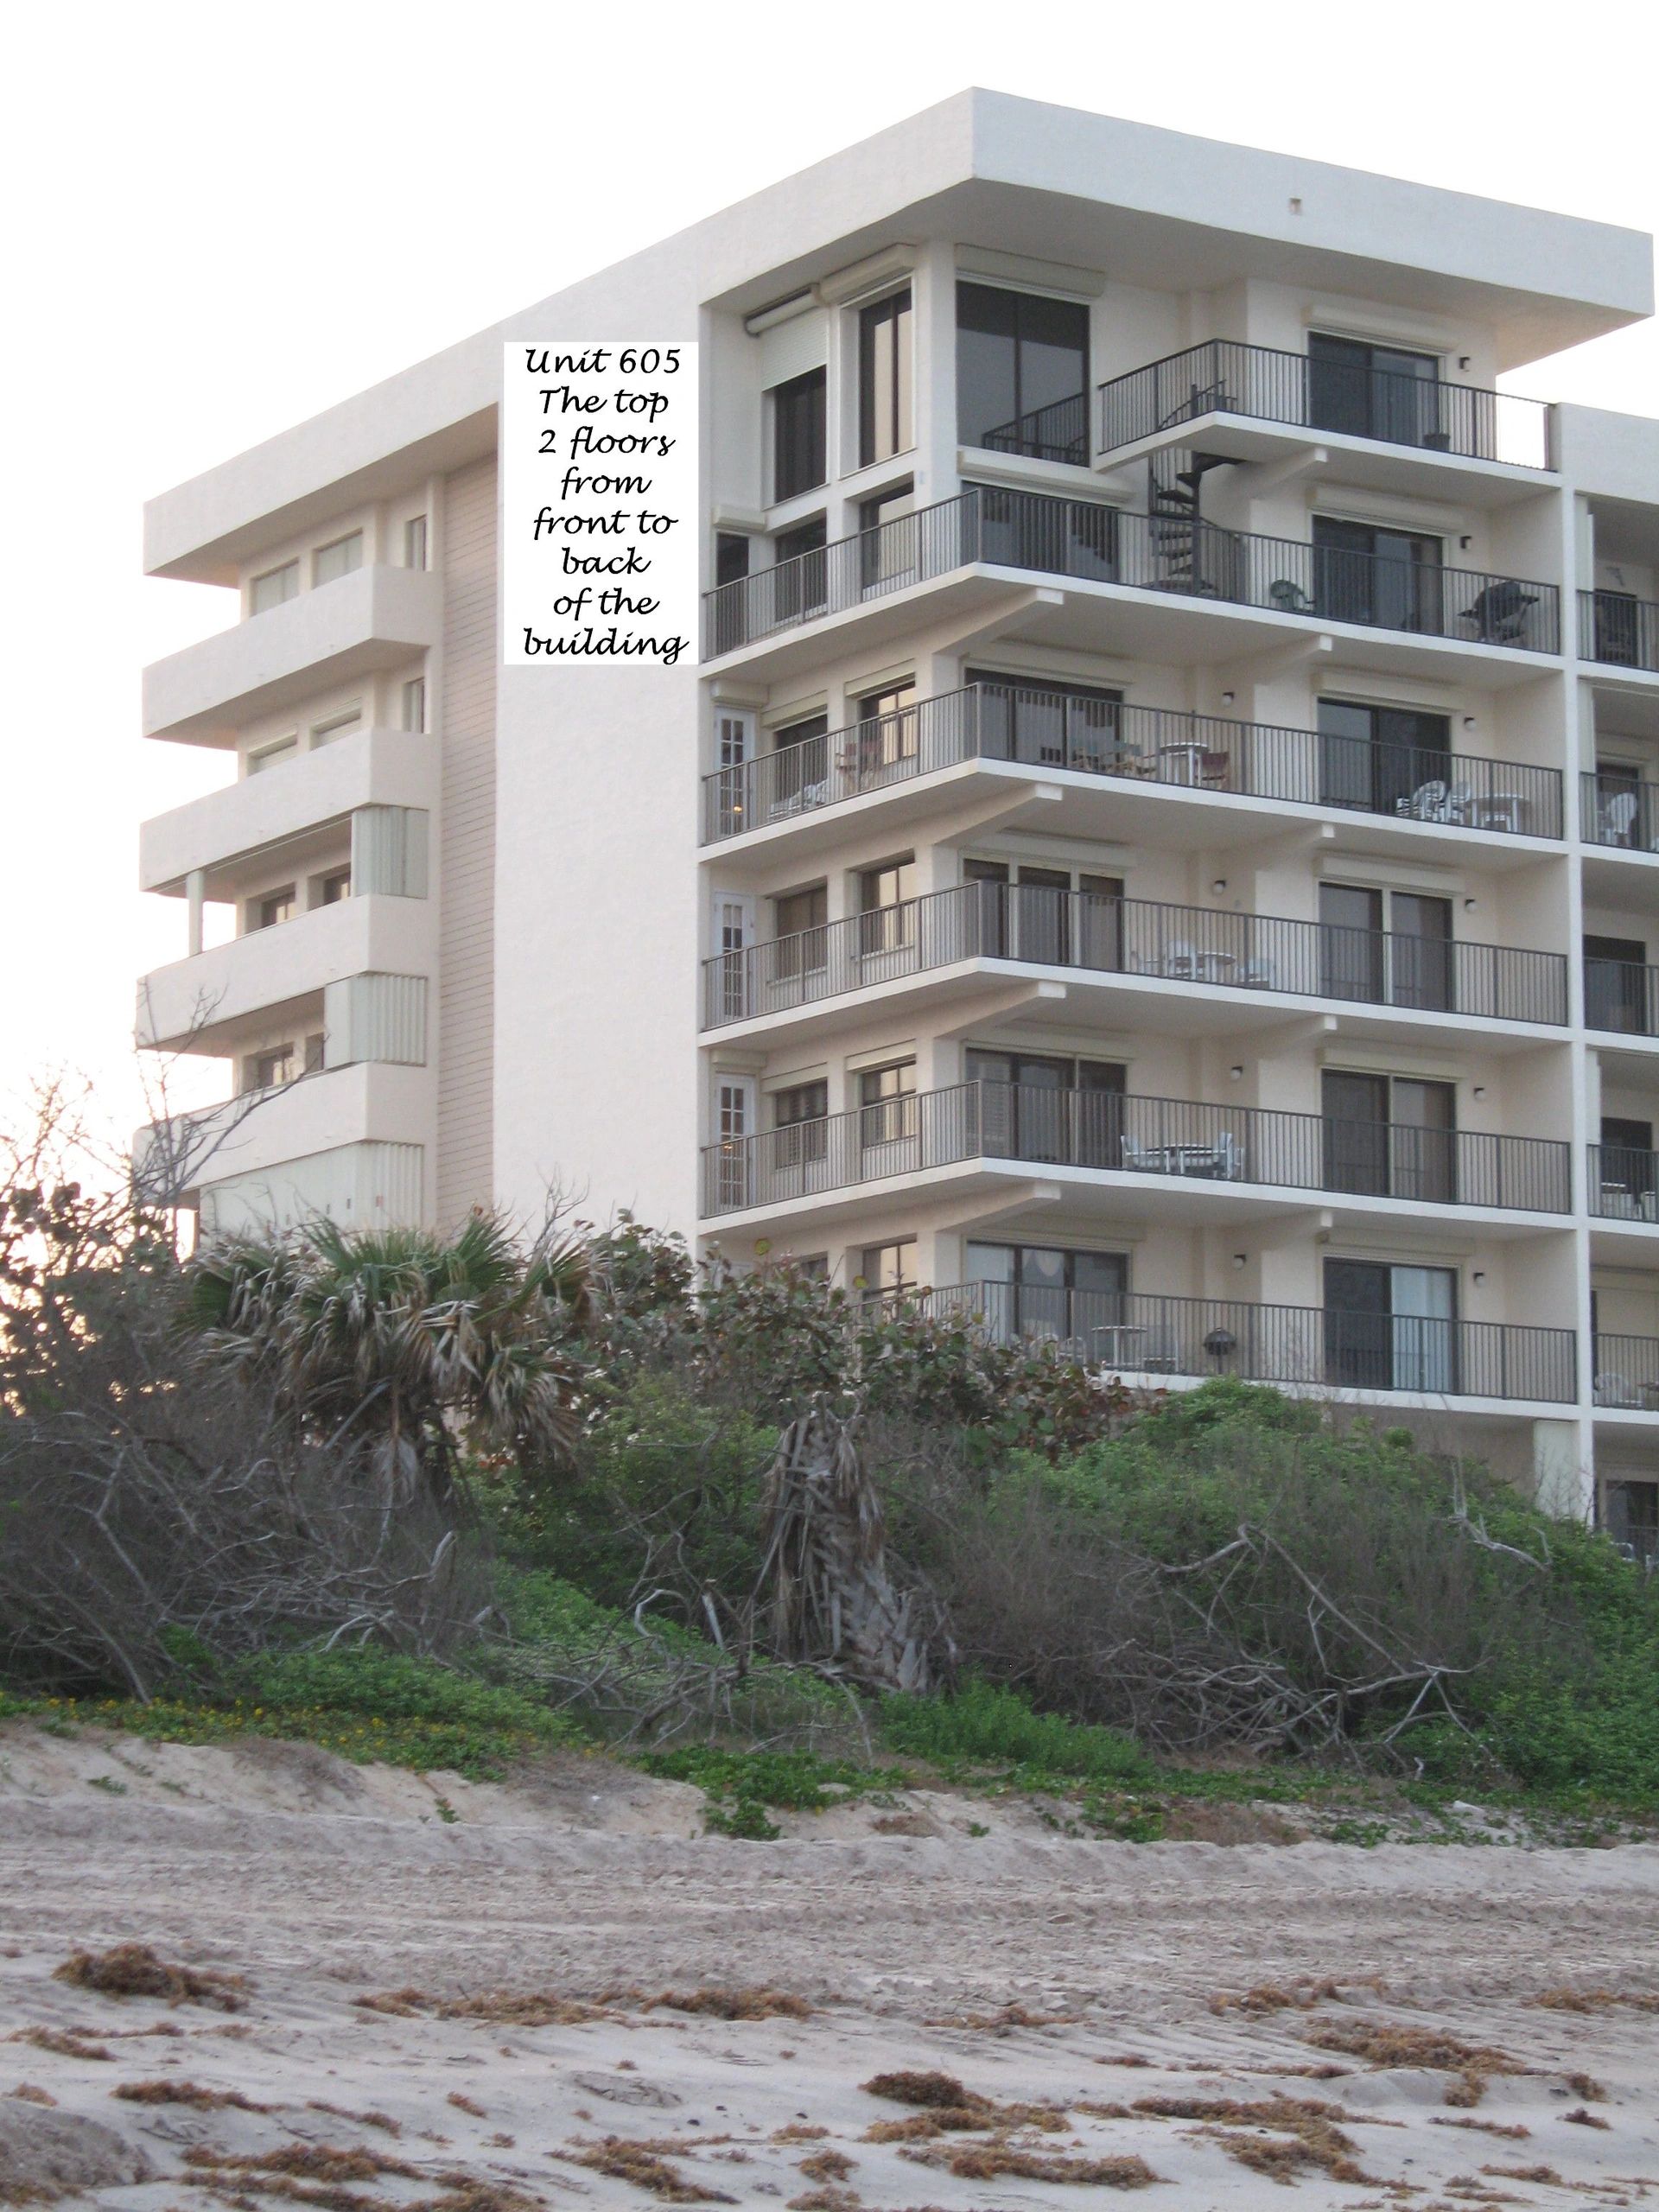 building_from_beach_with_text.jpg